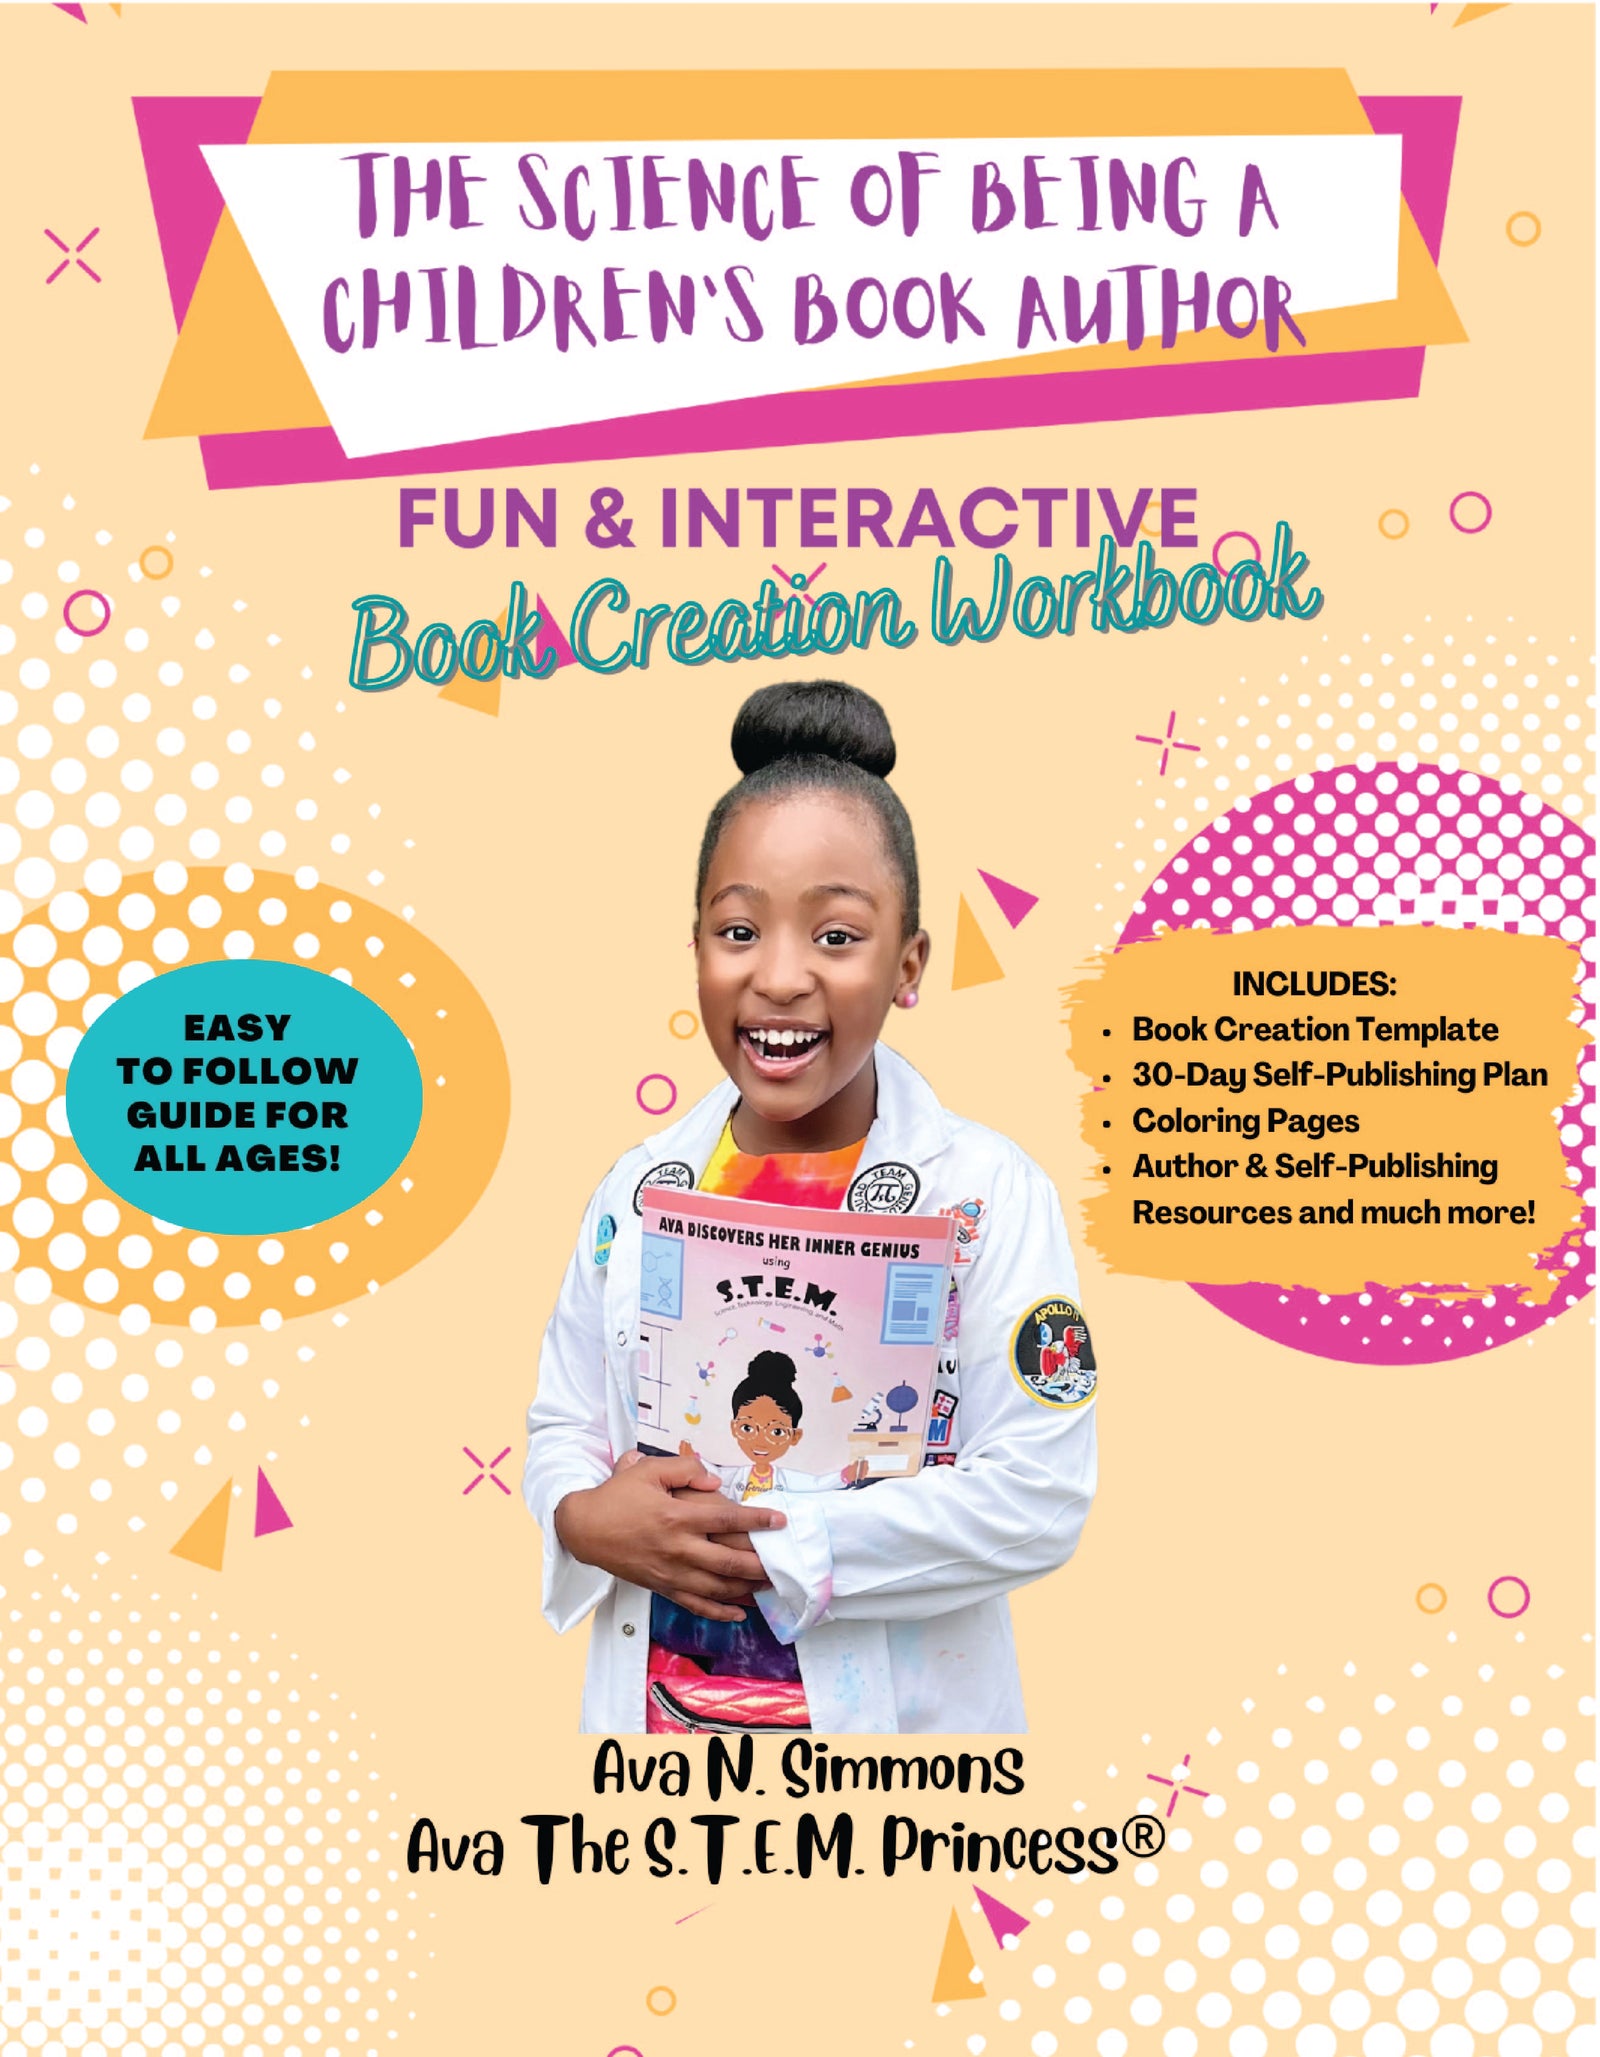 PUBLISHING WORKBOOK: The Science of Being A Children's Book Author